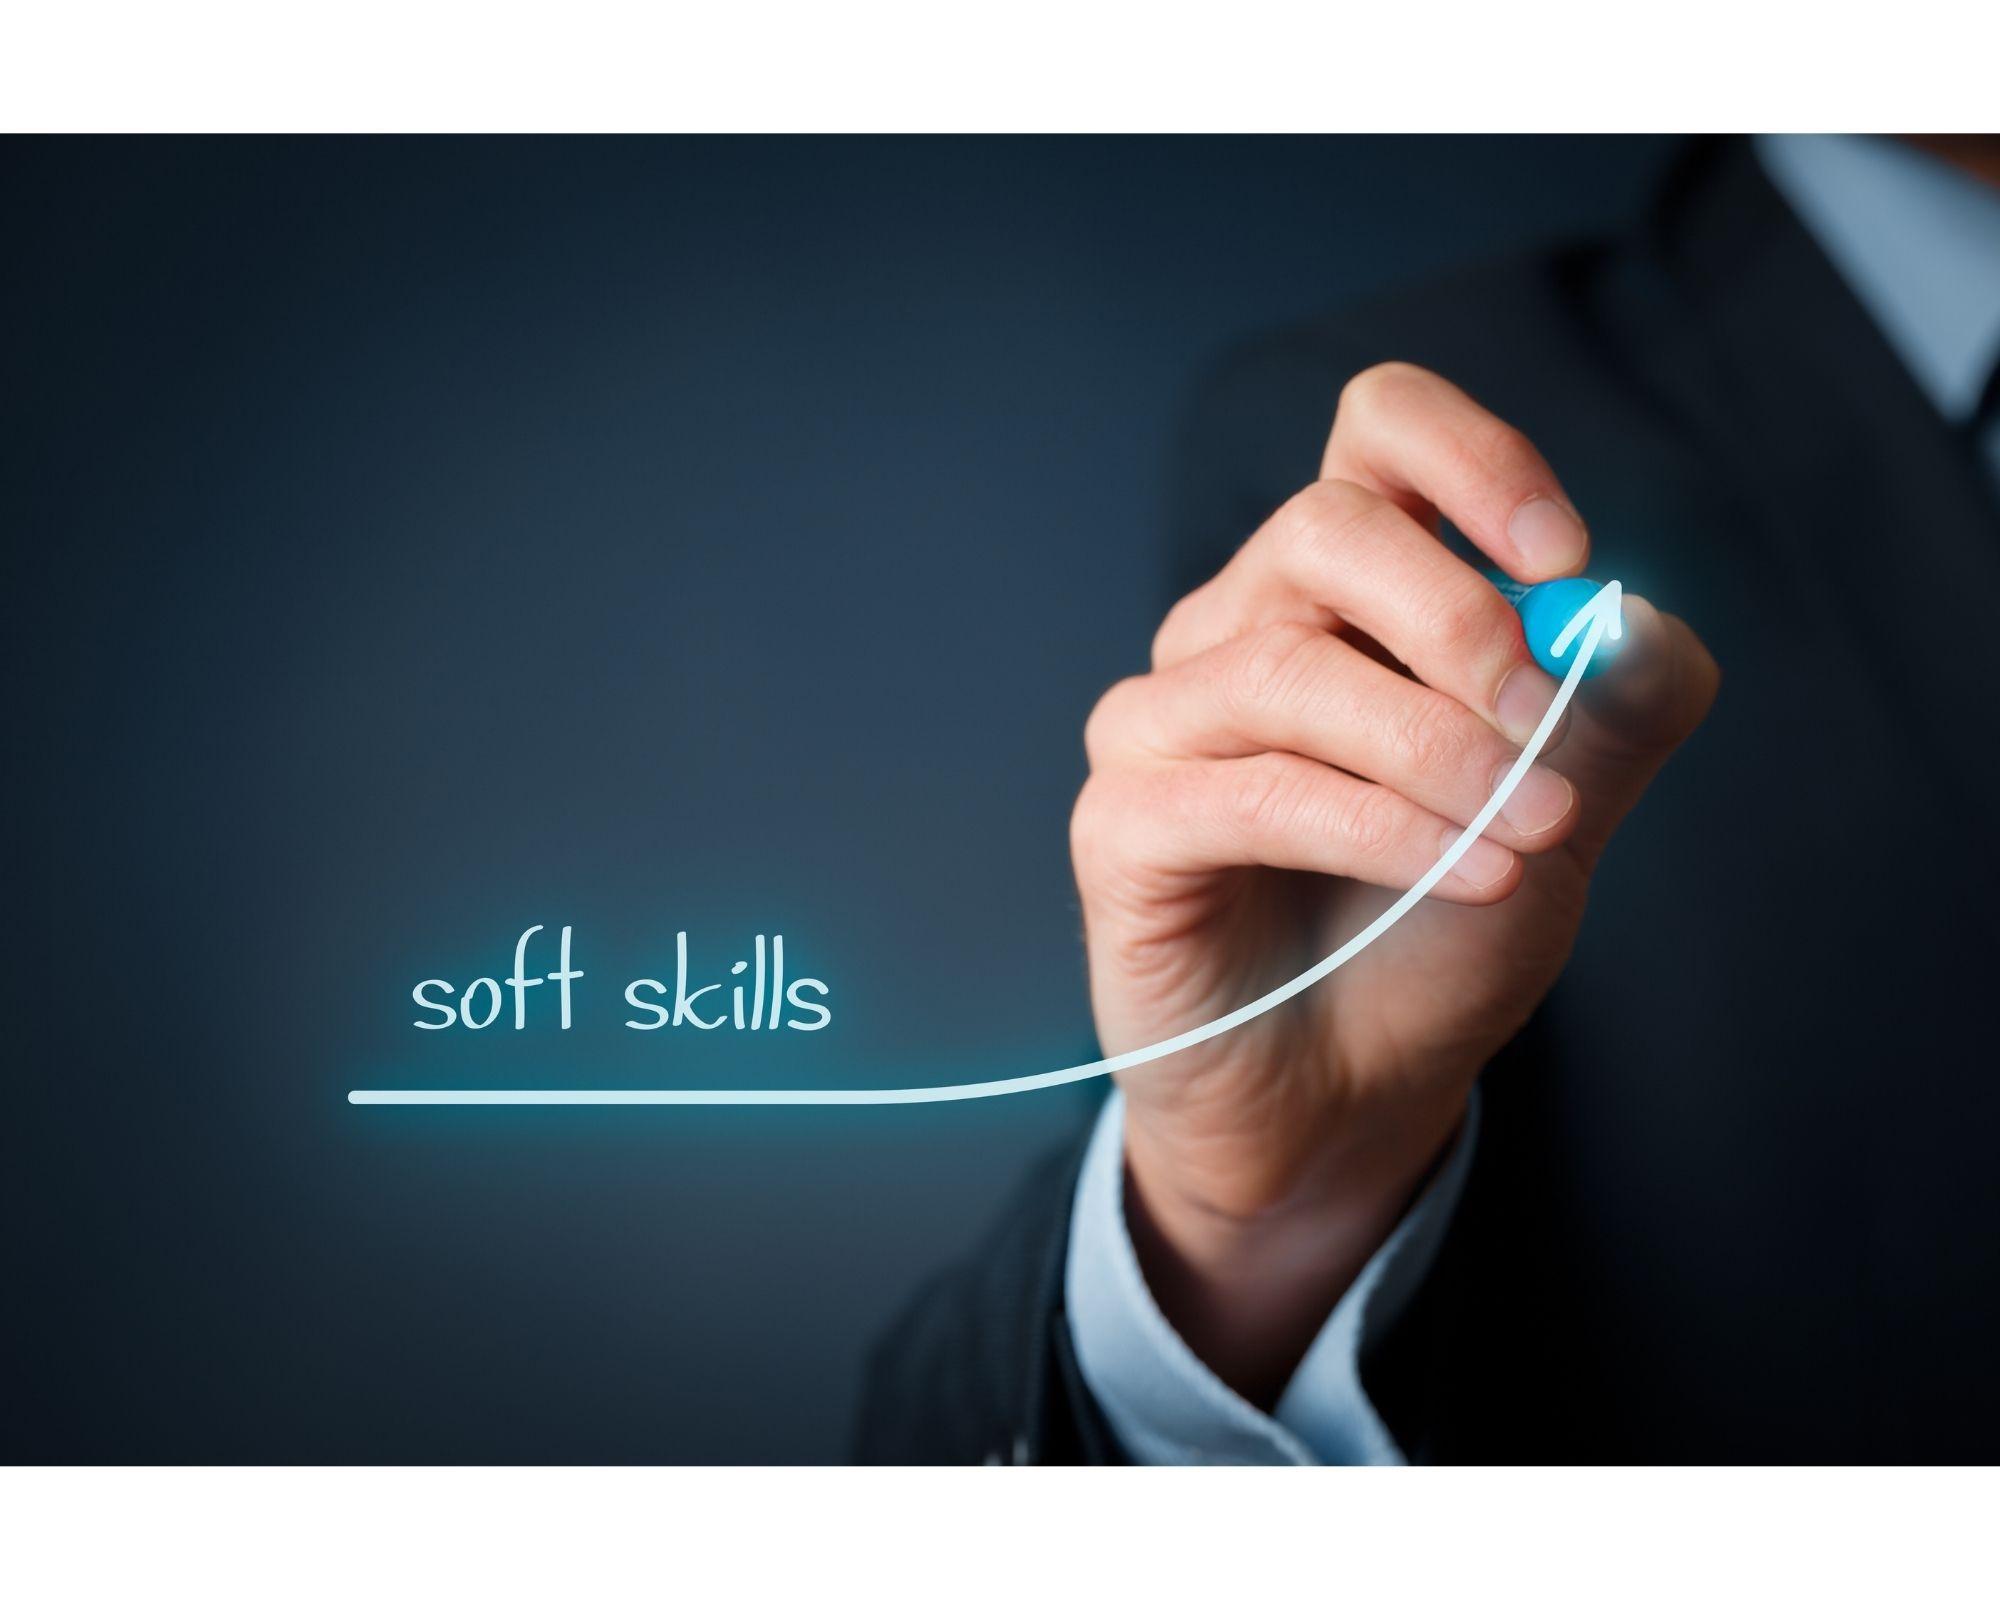 The soft skills of the Interim Manager